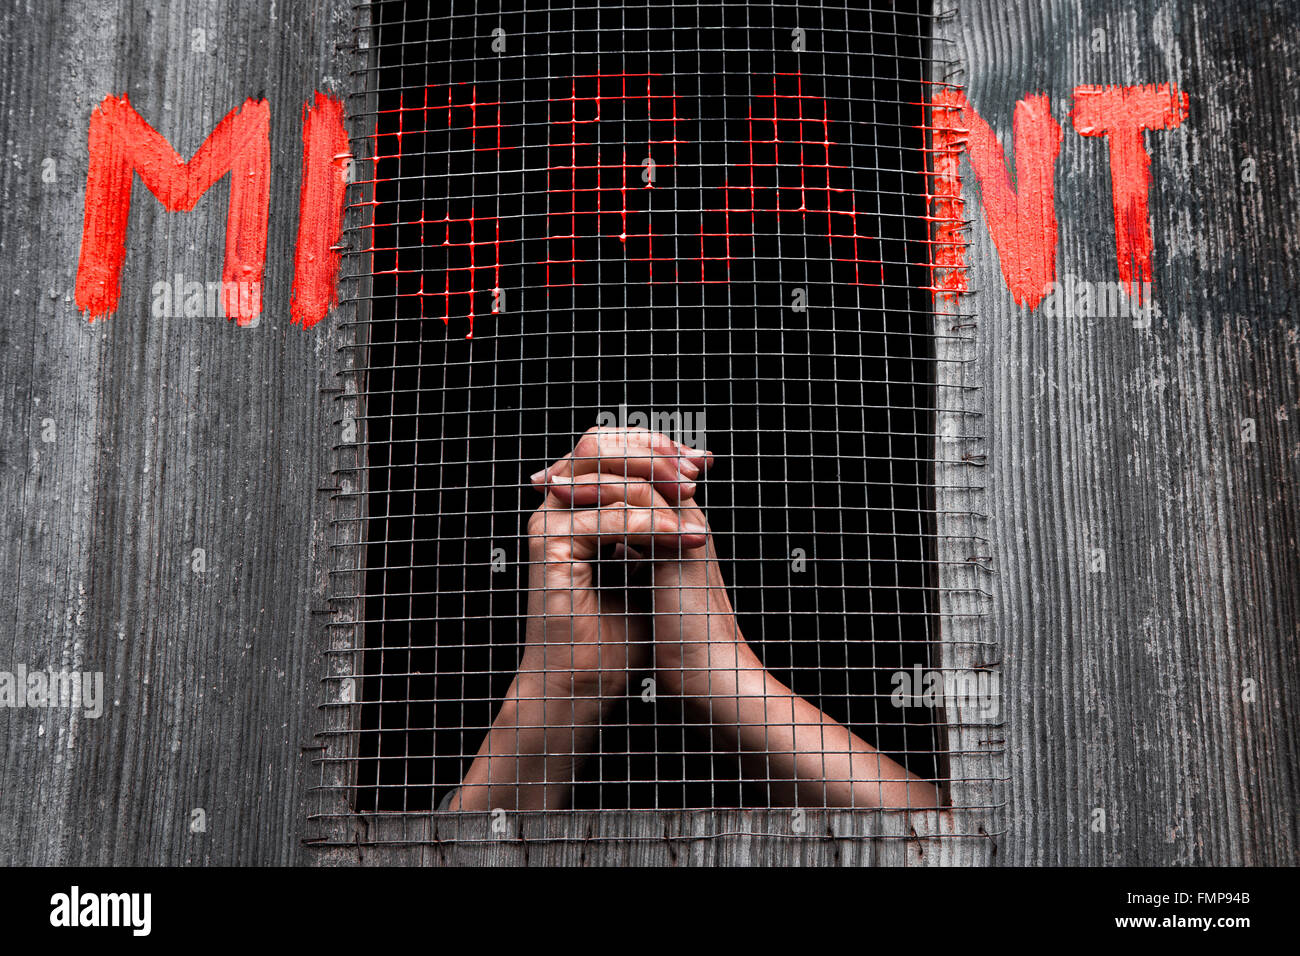 Hands behind bars, graffiti reading migrant, support for refugees Stock Photo